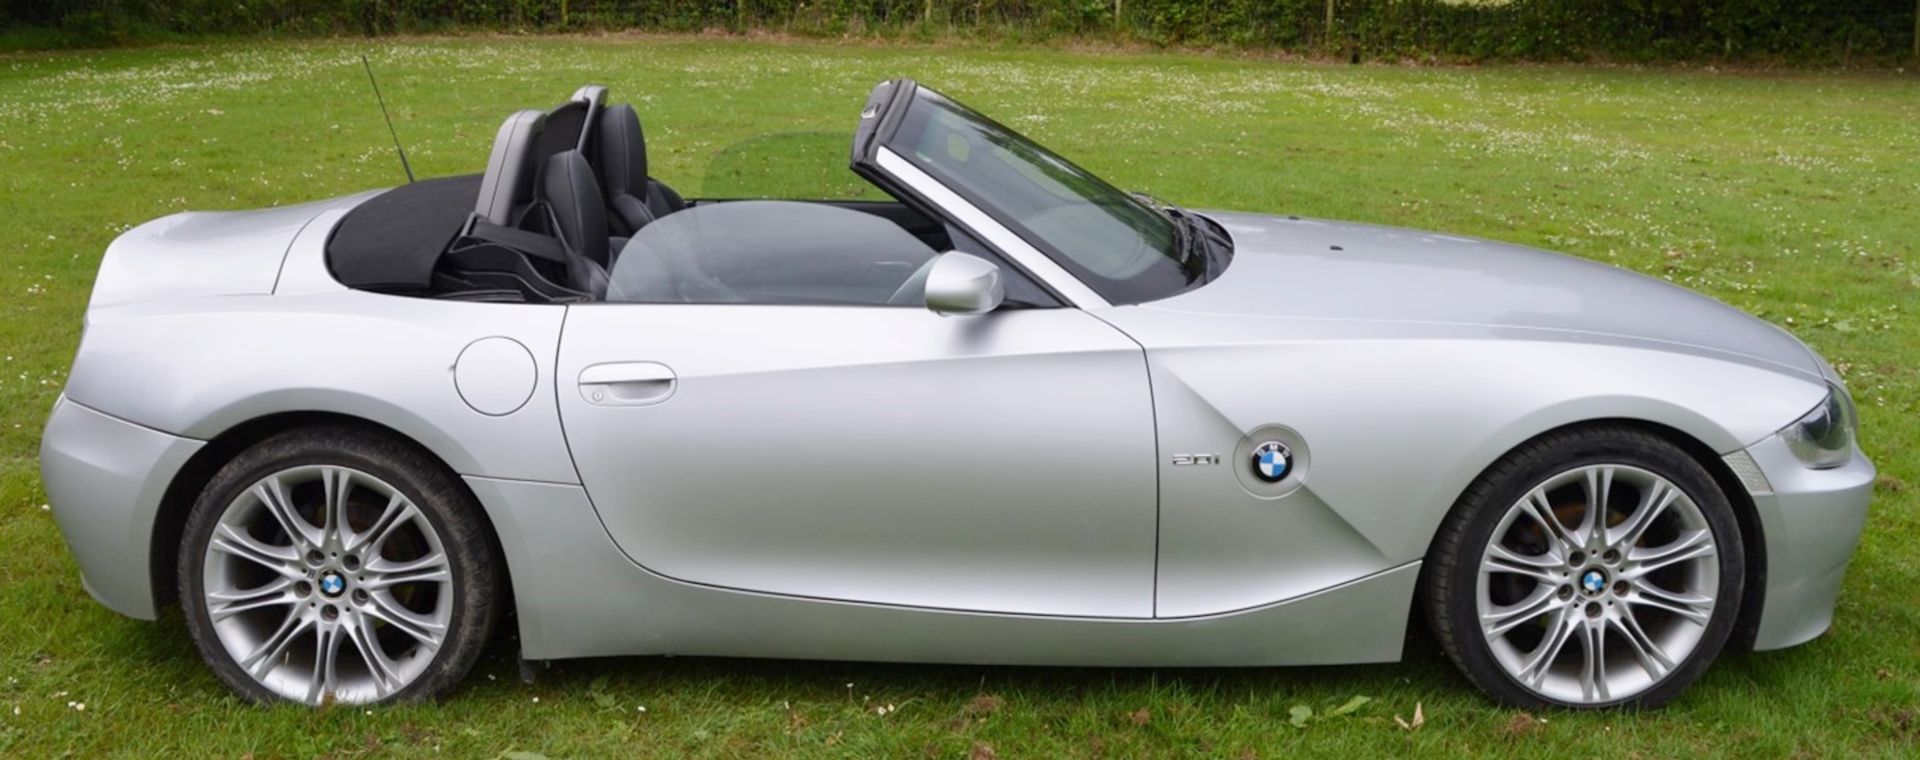 1 x BMW M Sport Convertible Z4 2.0i - 2008 58 Plate - 54,000 Miles - Silver Finish - Power Roof - - Image 4 of 47